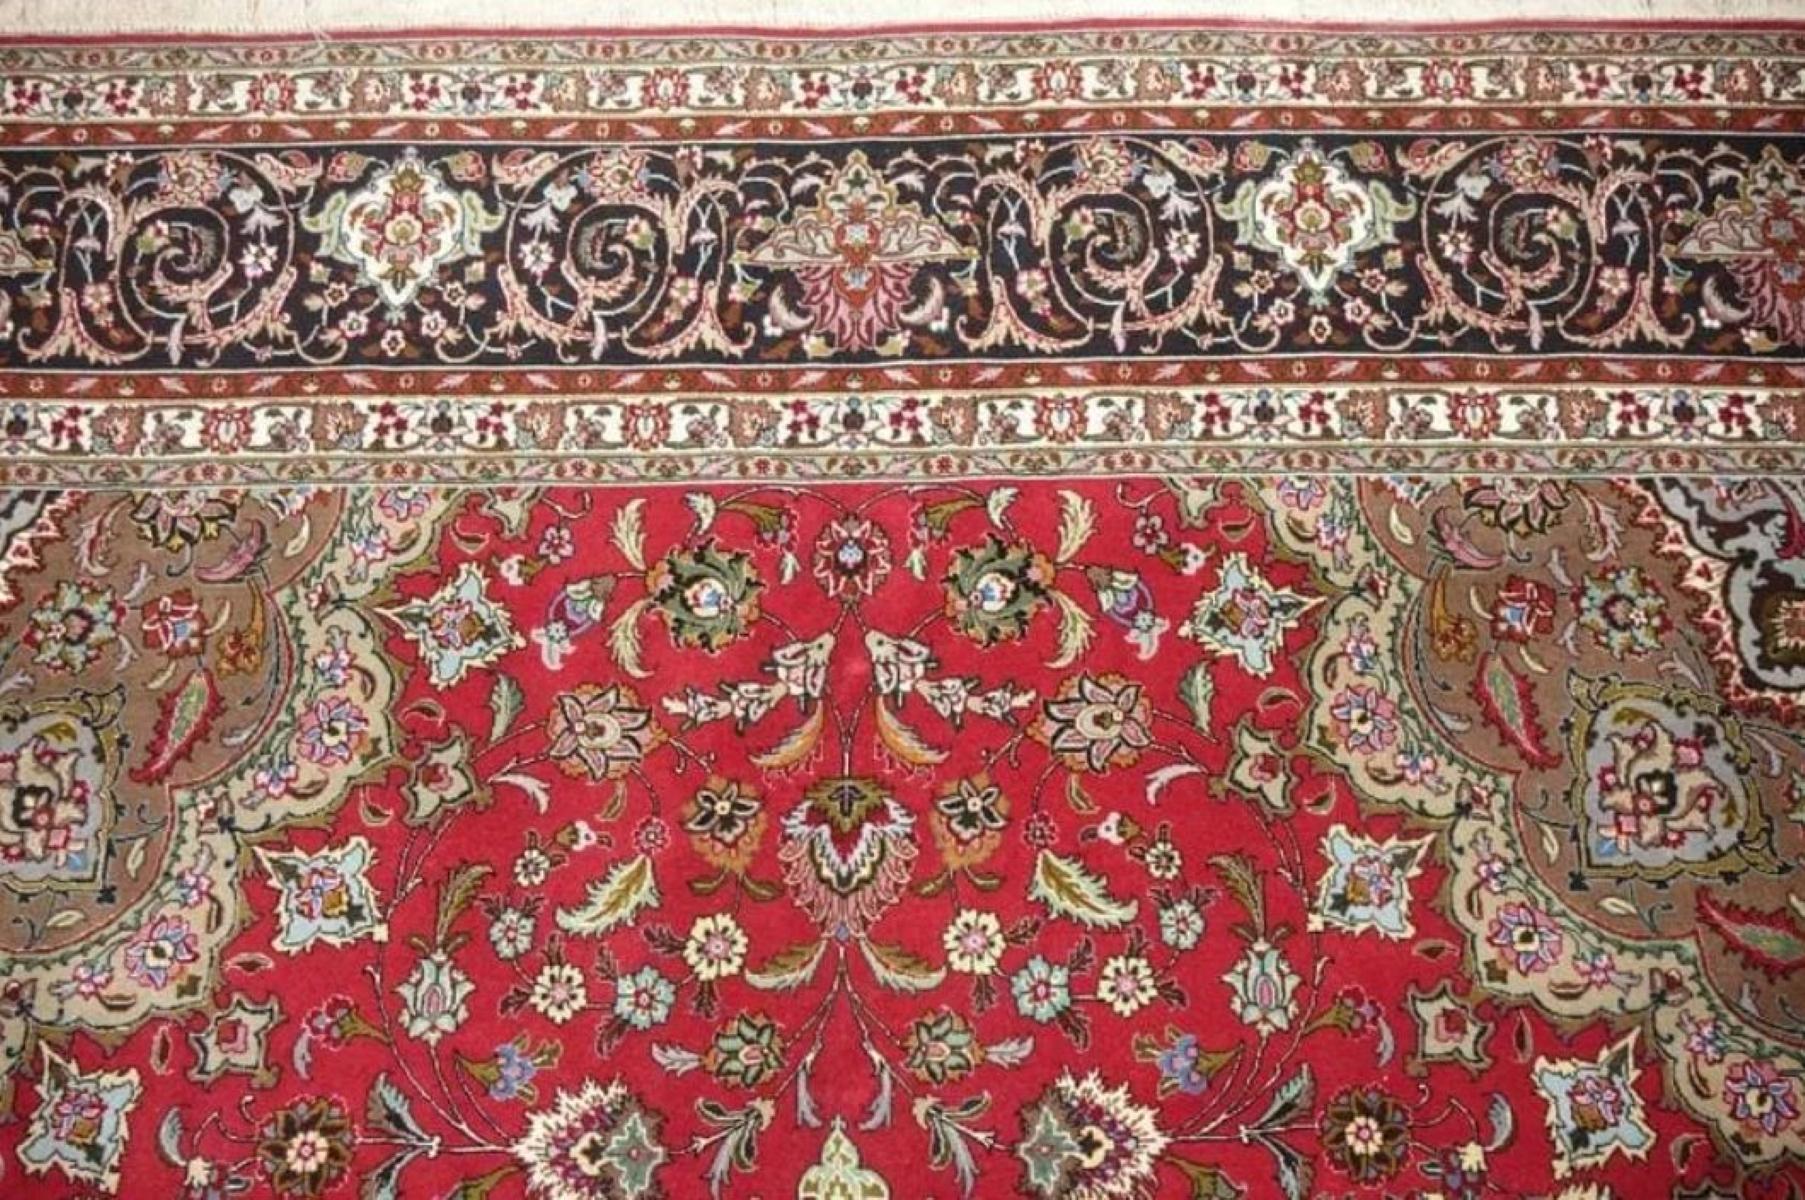 Very fine Persian Tabriz Silk & Wool Rug - 11.8' x 8.3' In Excellent Condition For Sale In Newmanstown, PA